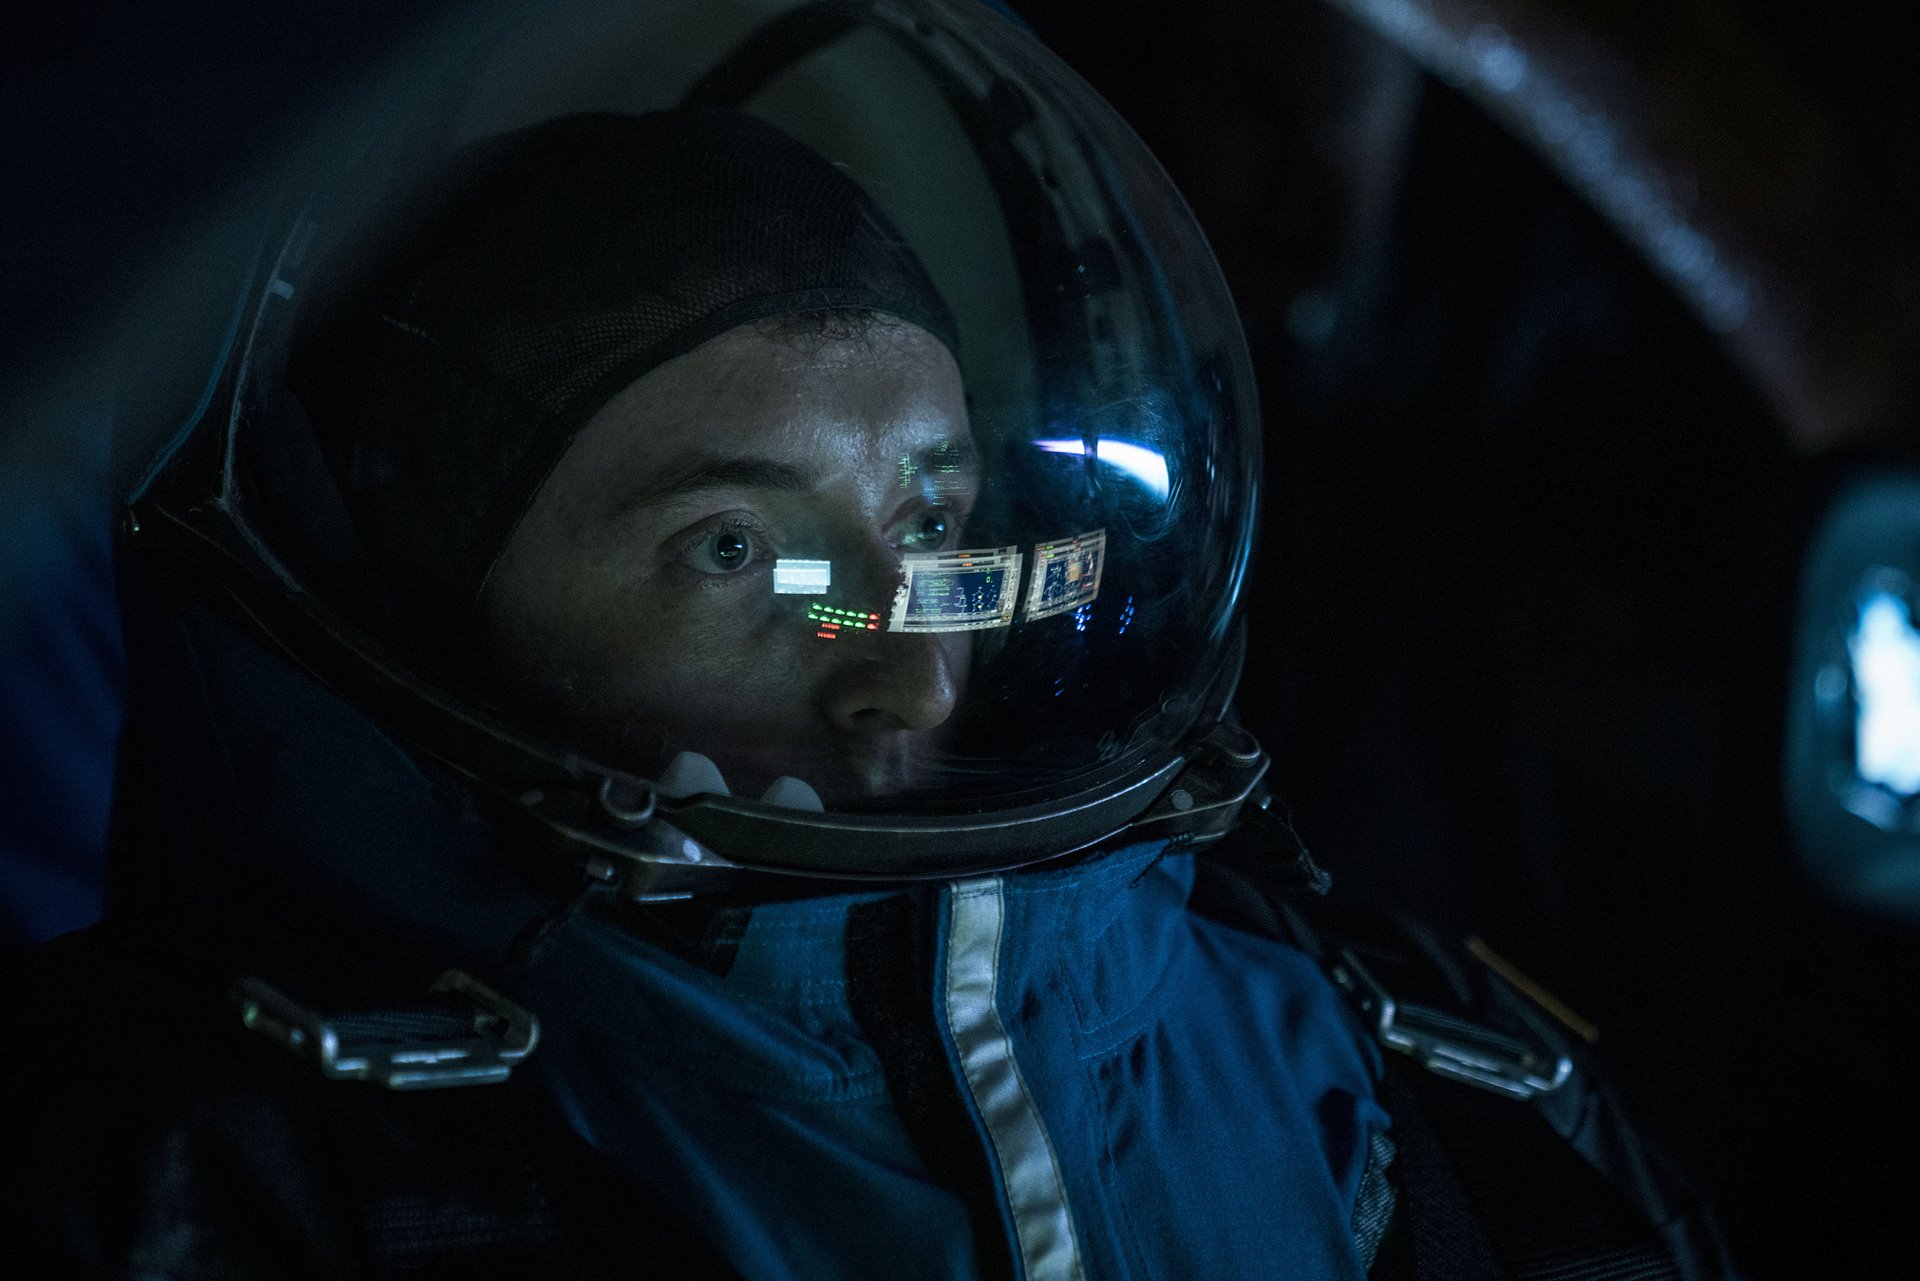 Gay Space Agency fictional astronaut Brian Murphy during flight simulations in Melbourne, Florida, United States. Murphy is a real-life LGBTQI+ aspiring astronaut participating in civilian astronaut training with the nonprofit, Out Astronaut.